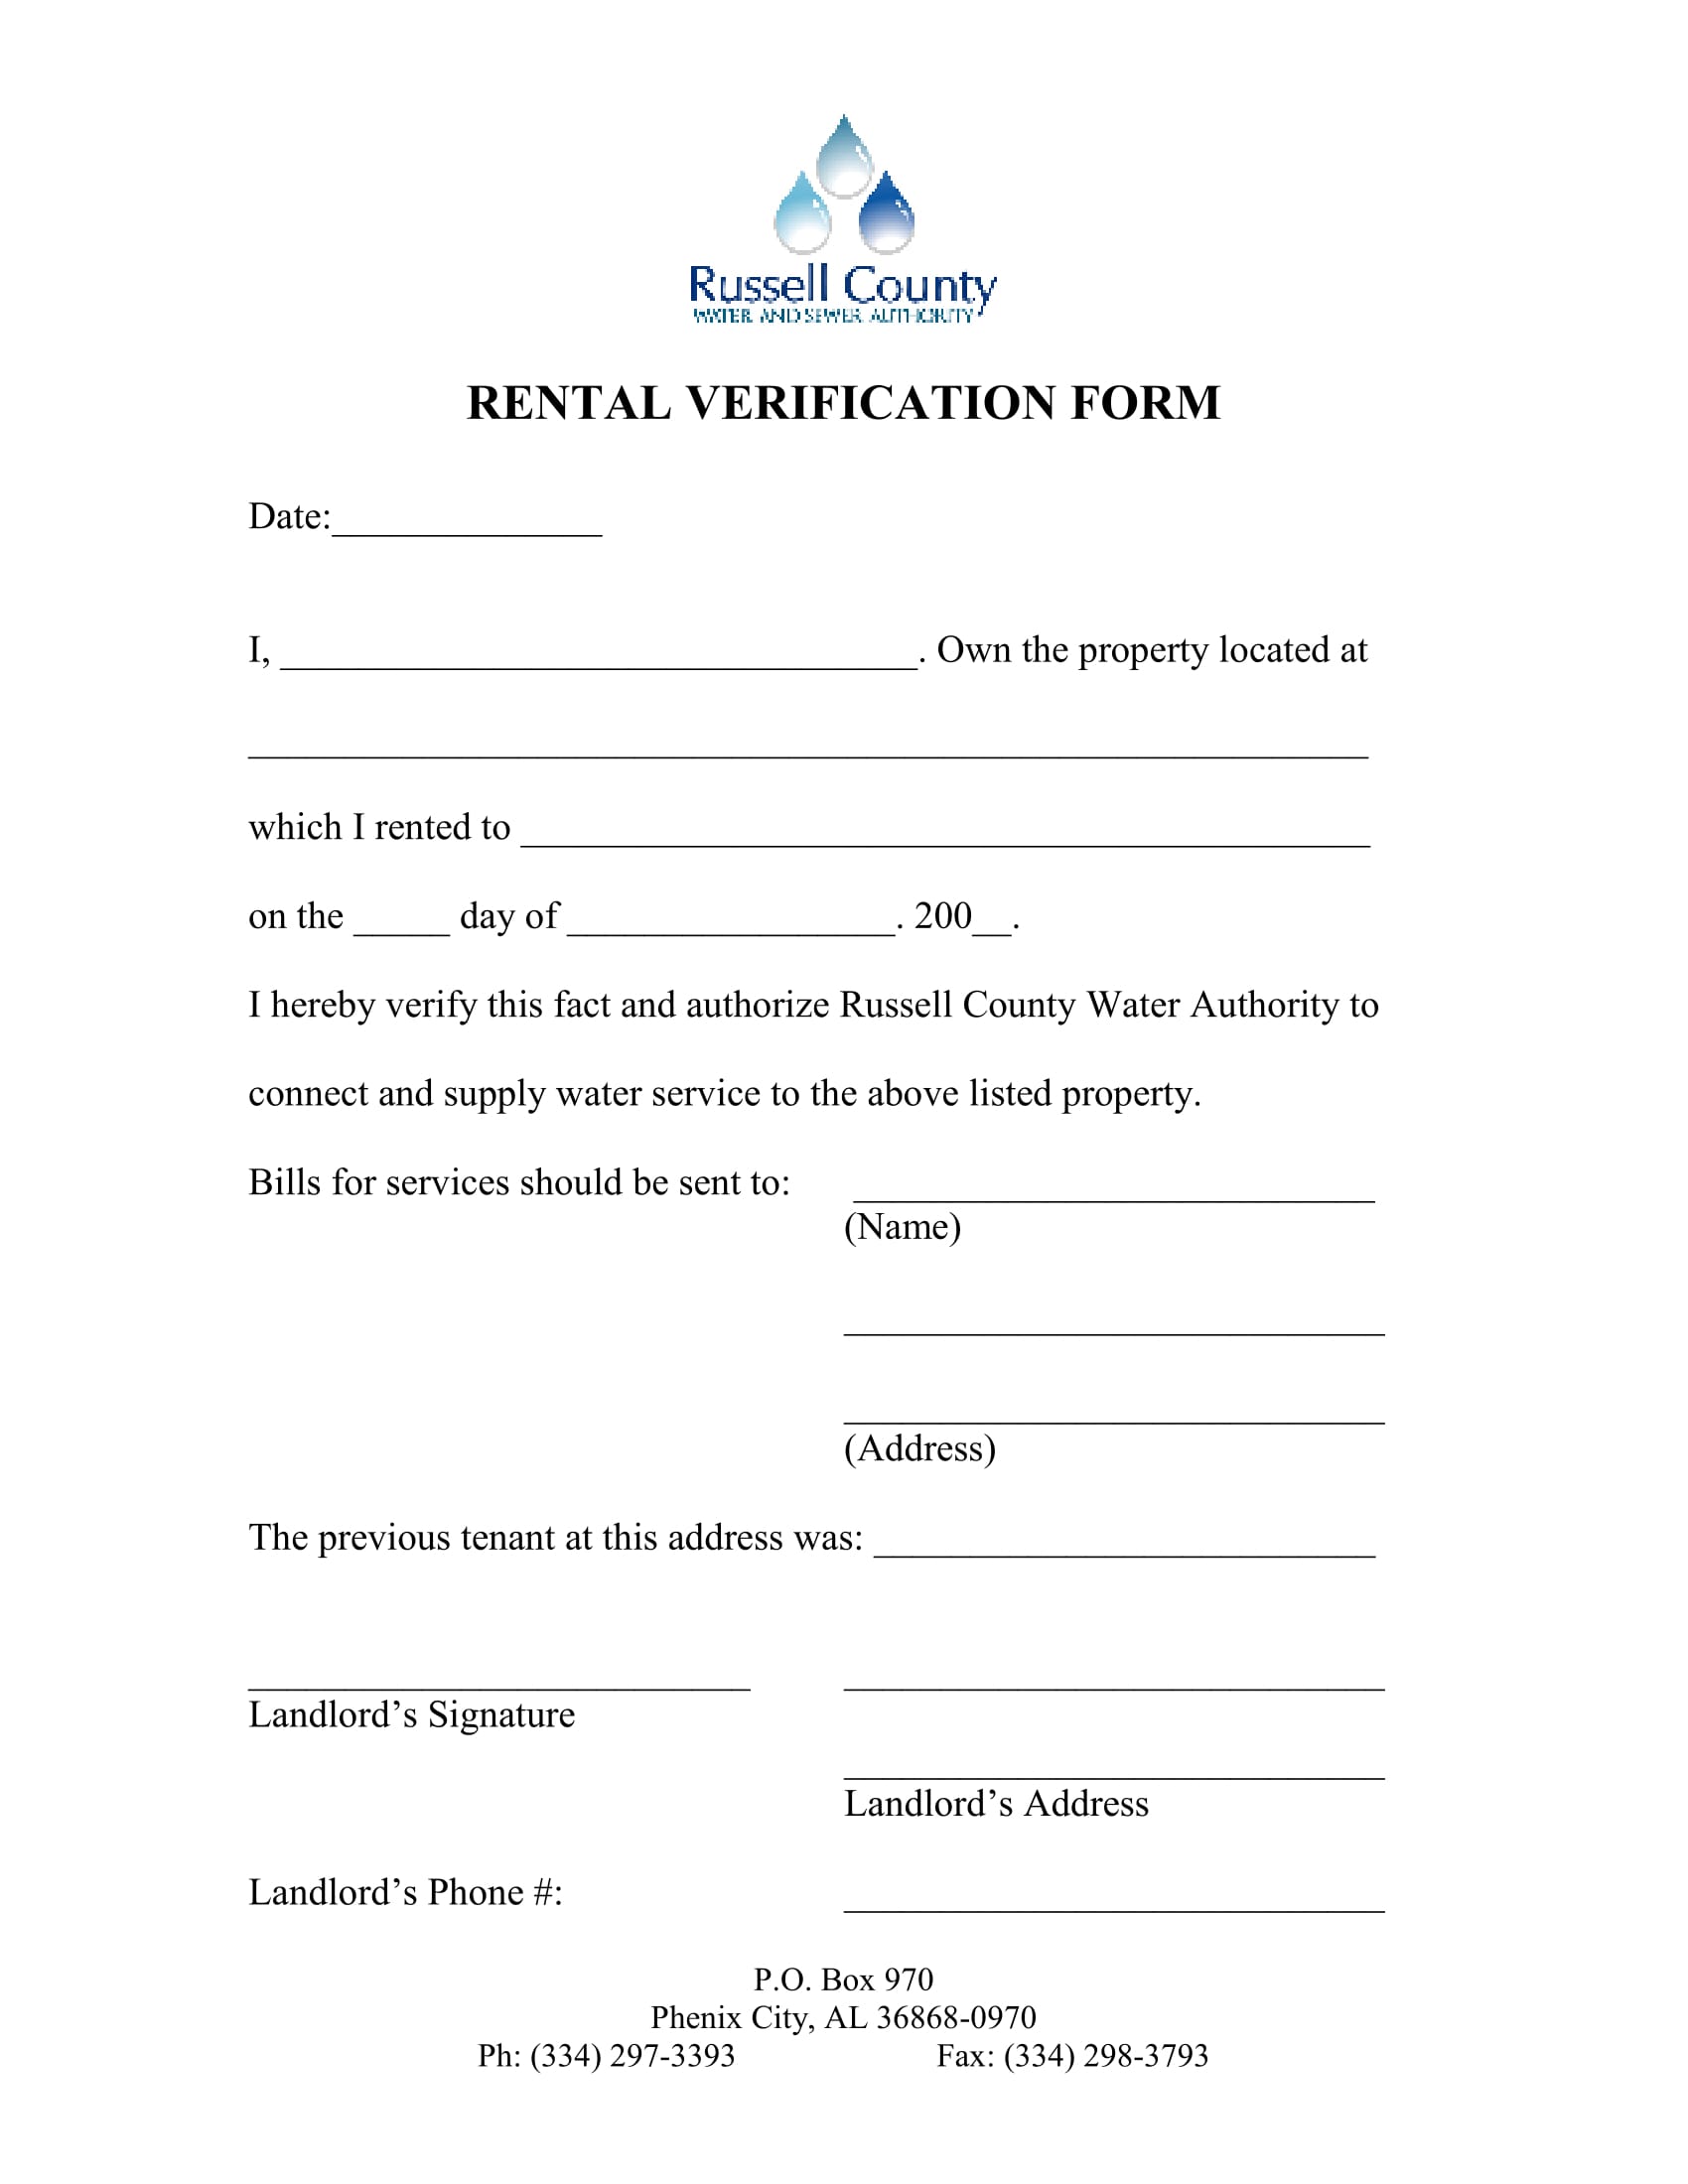 rental verification form for water supply 1